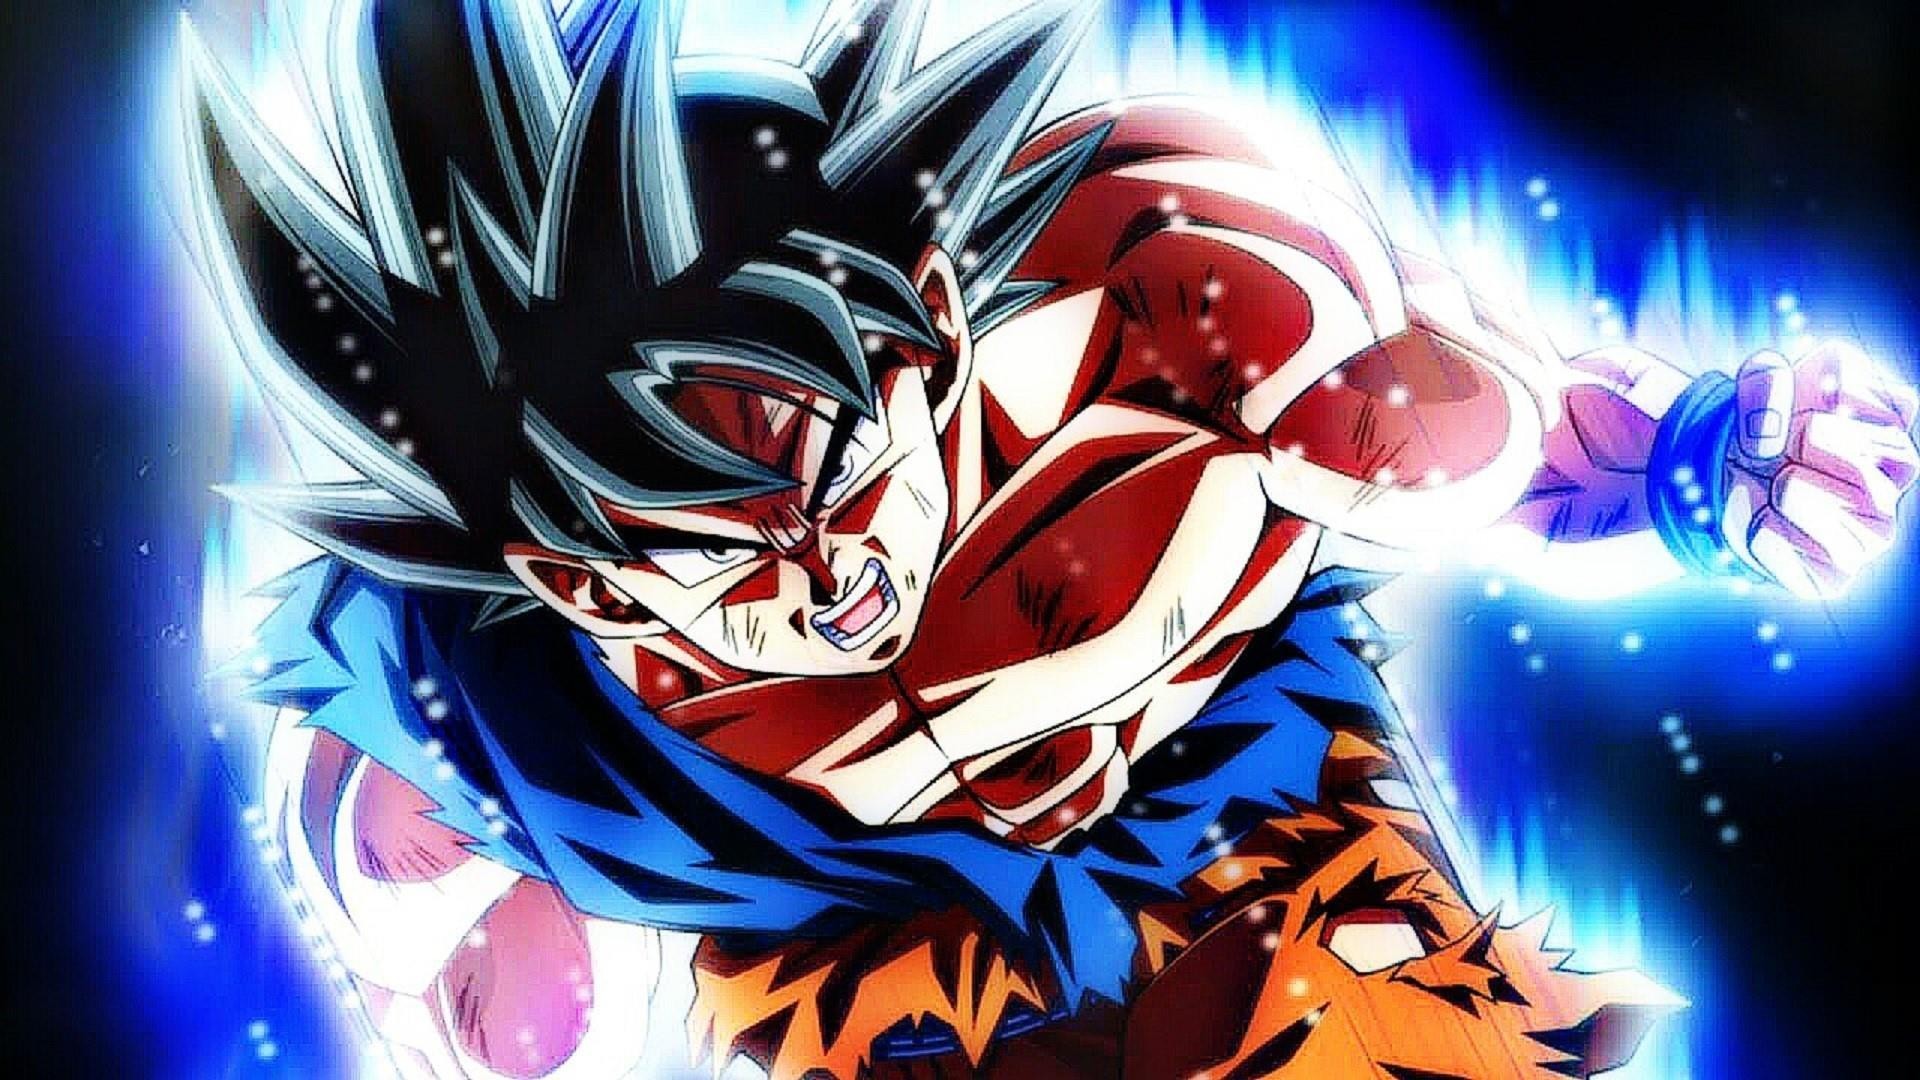 Best Goku Wallpaper with image resolution 1920x1080 pixel. You can use this wallpaper as background for your desktop Computer Screensavers, Android or iPhone smartphones